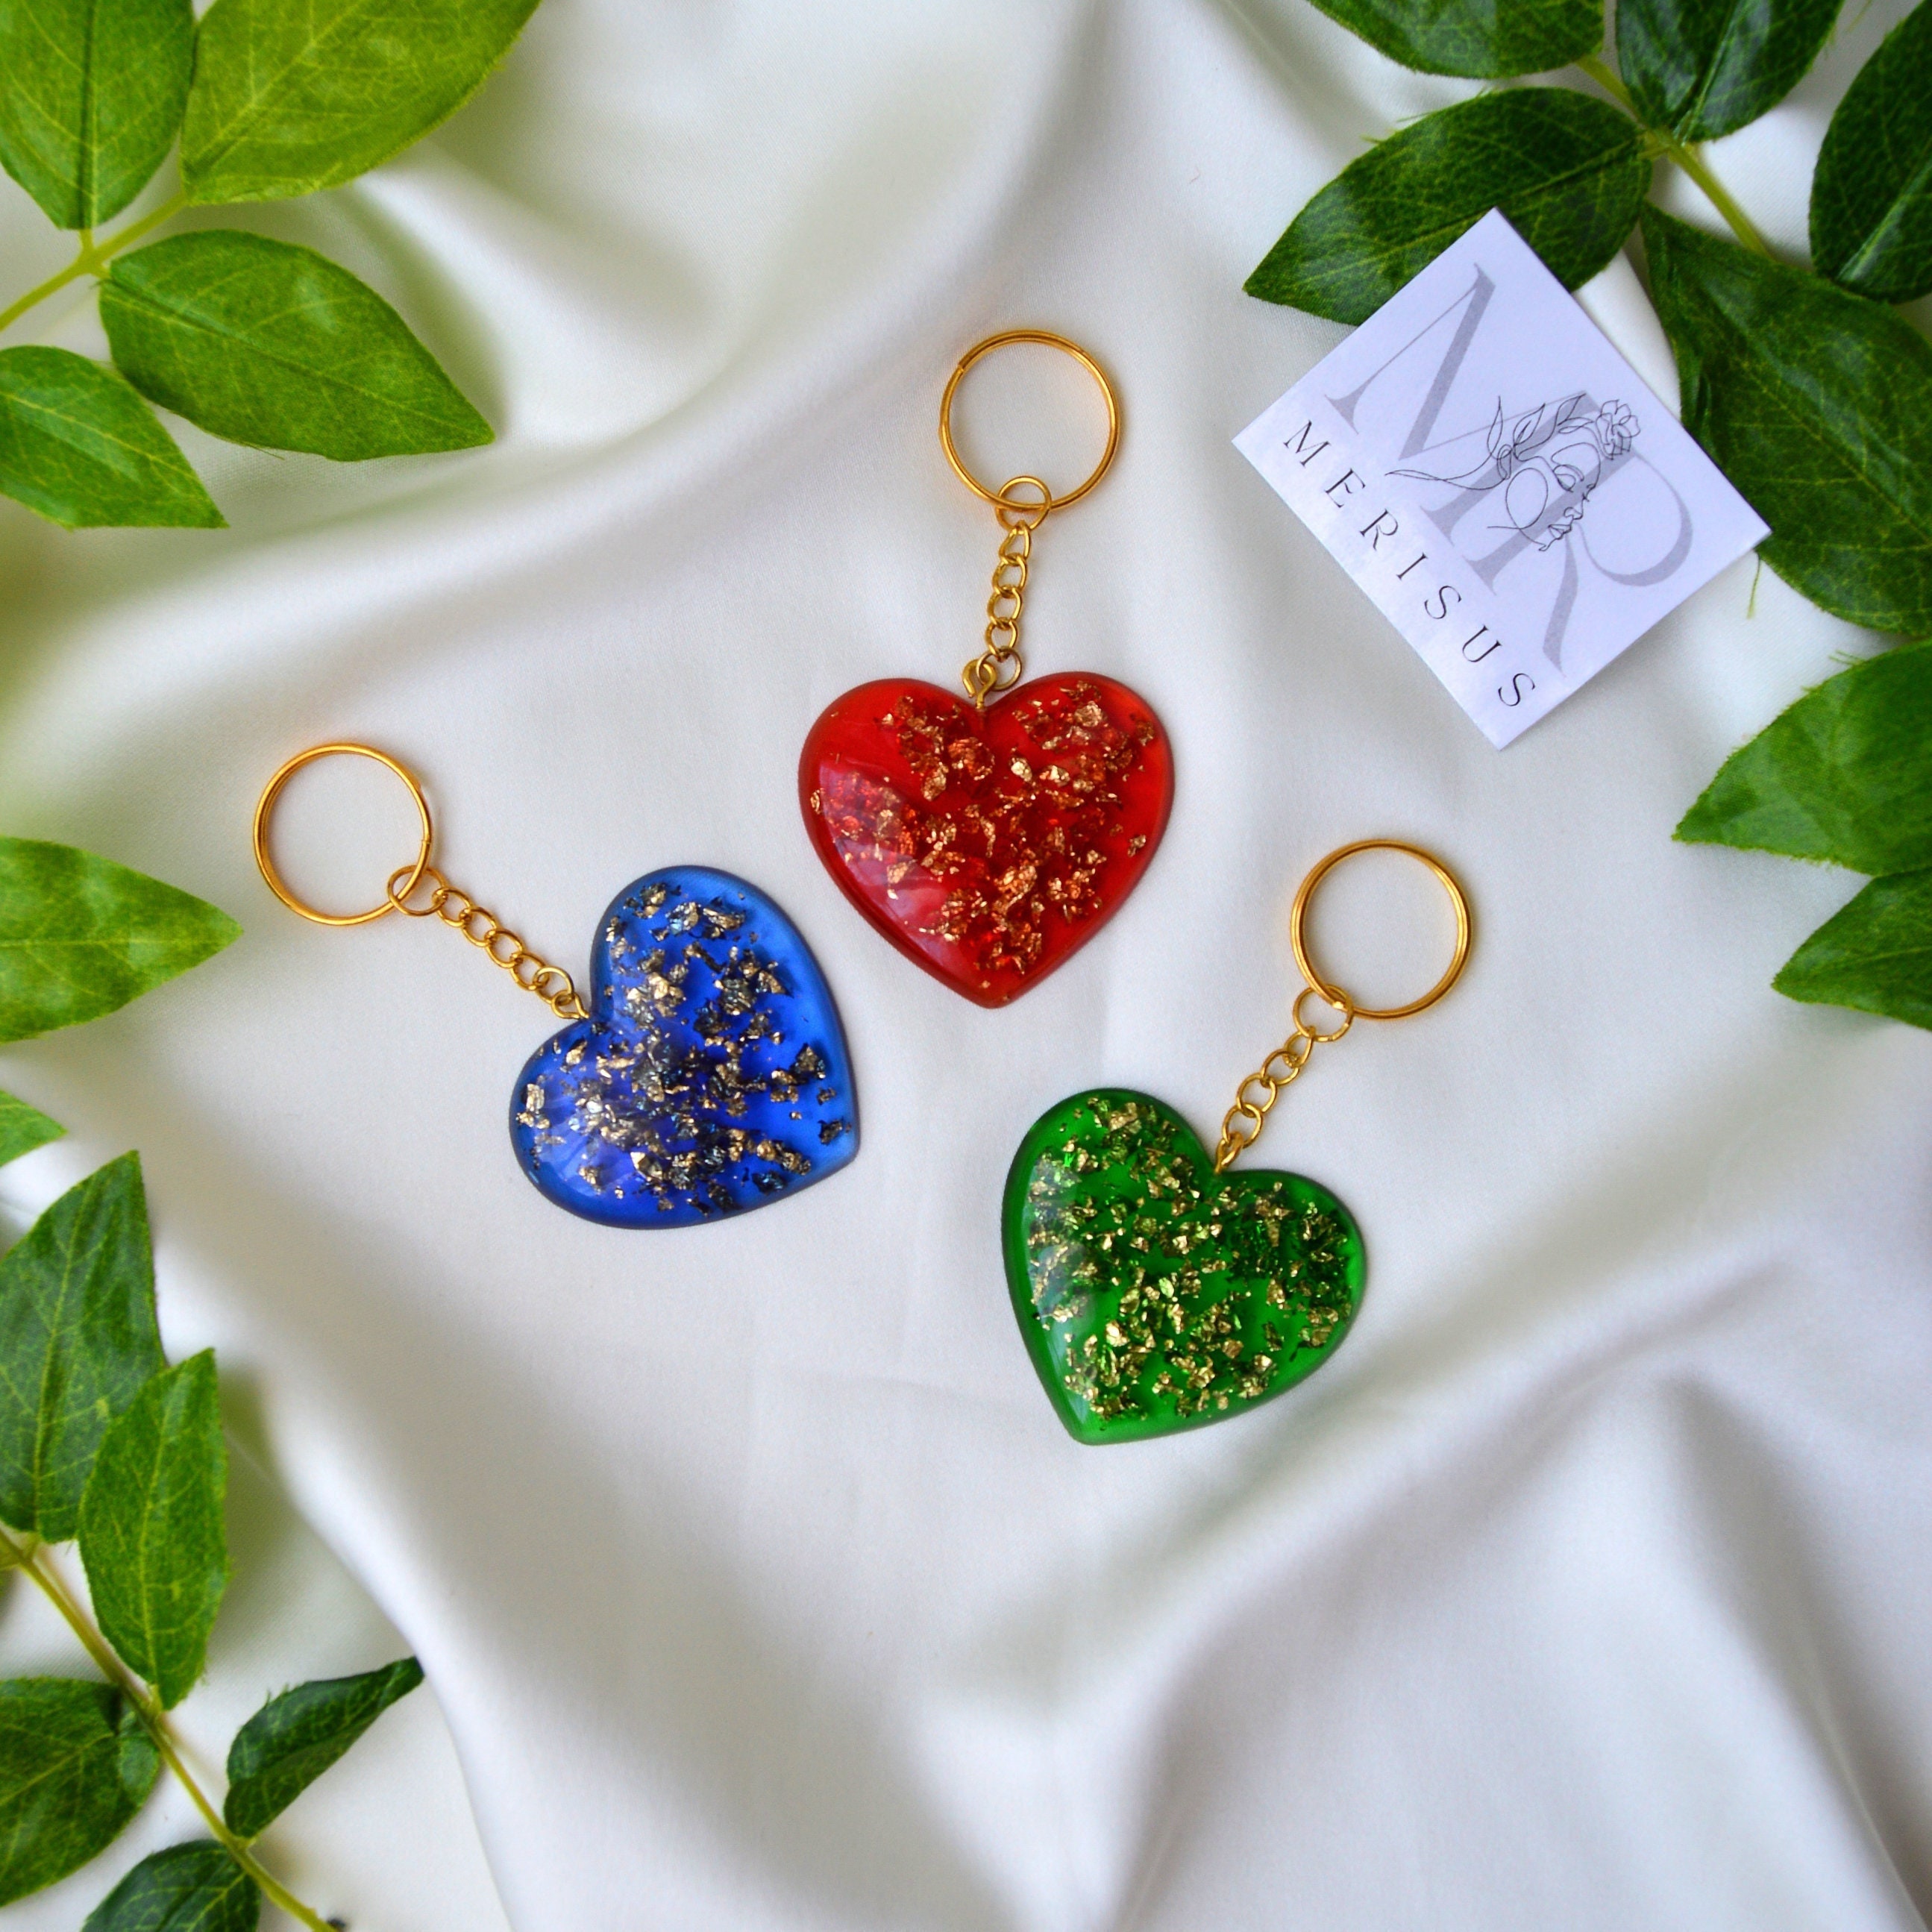 New Charmed Heart designer bag charms online now! — Shh by Sadie